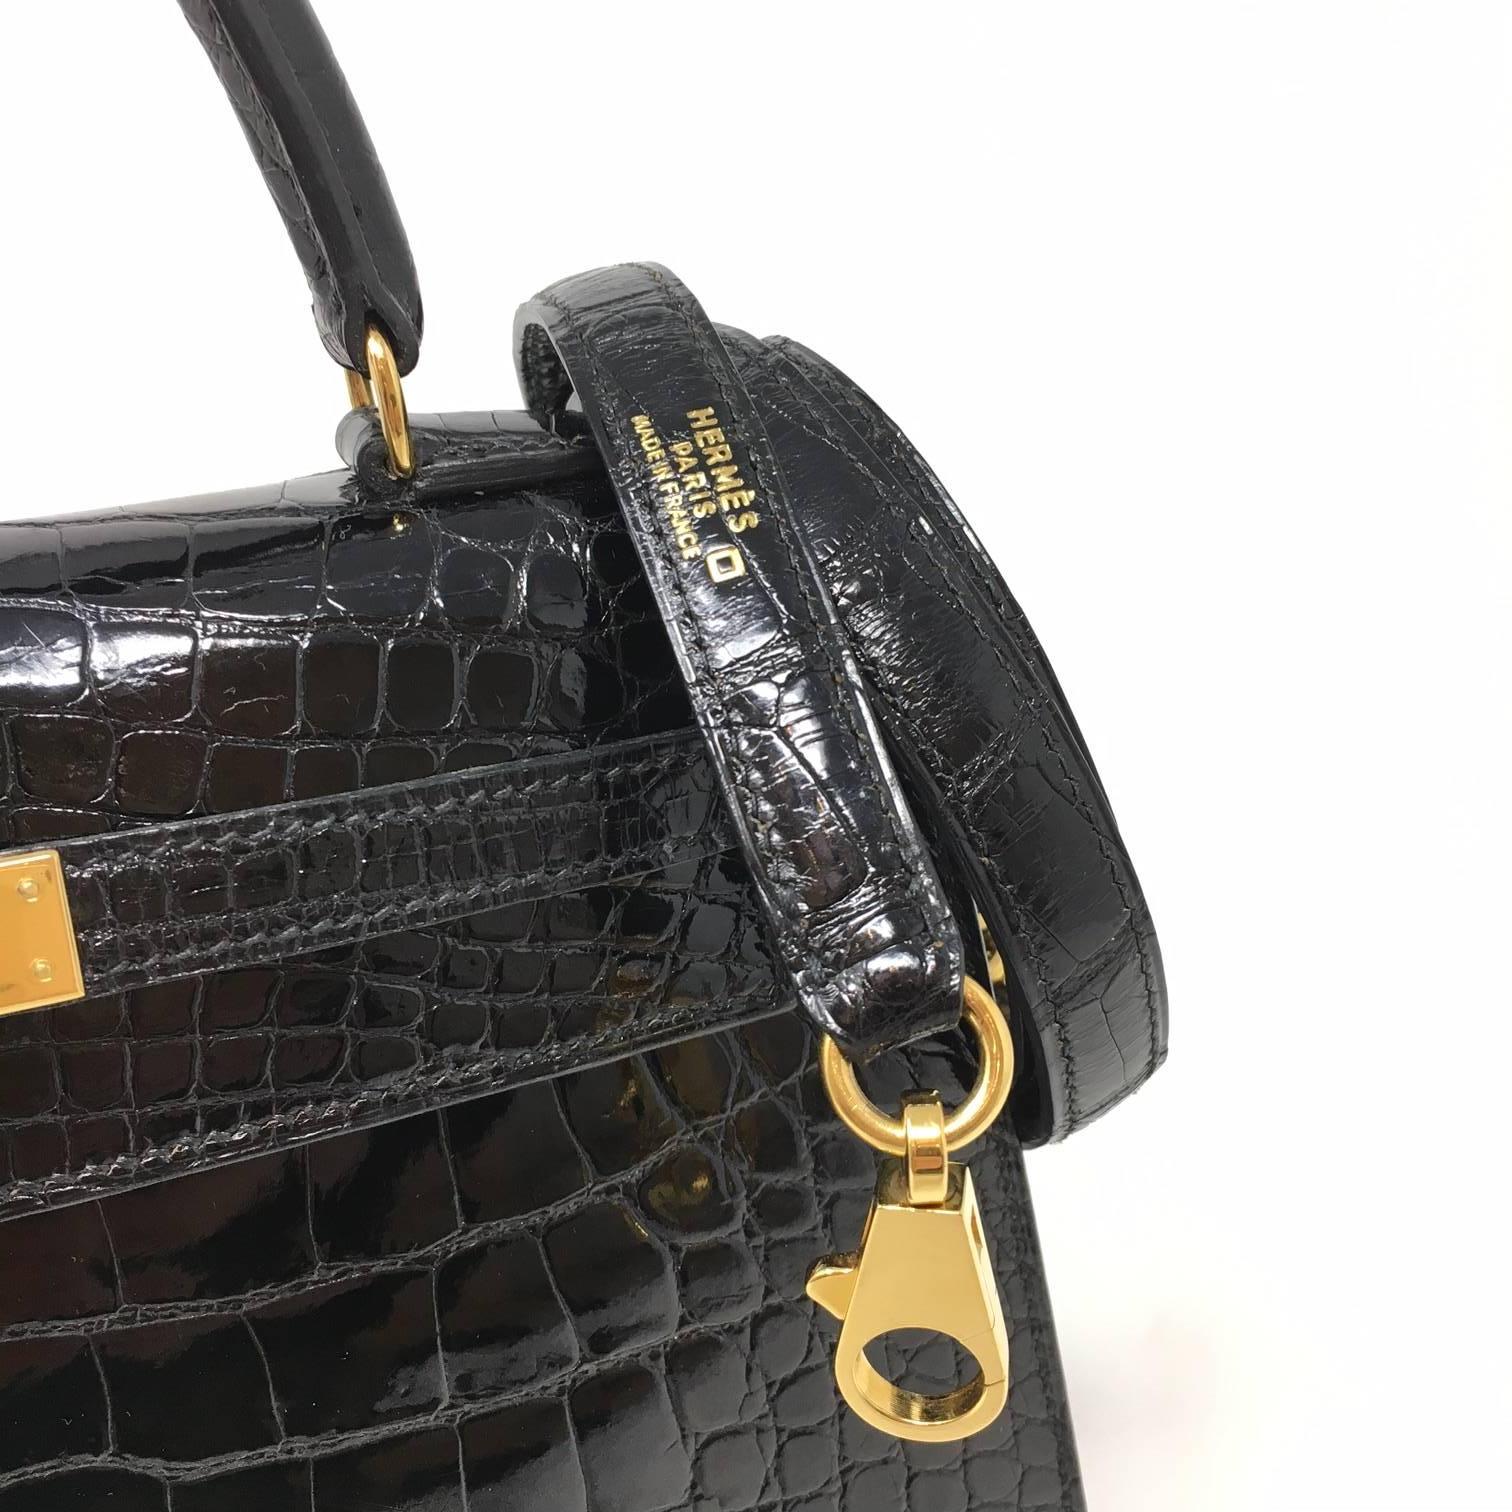 Amazing and Rare Hermes Kelly Sellier 25 Size Bag in Black Shiny Alligator Crocodile Leather. The Bag Contrast with Gold Hardware.
Vintage Piece Year 1999 and the Conditions are very good both inside and out.
The bag is complete with its Shoulder